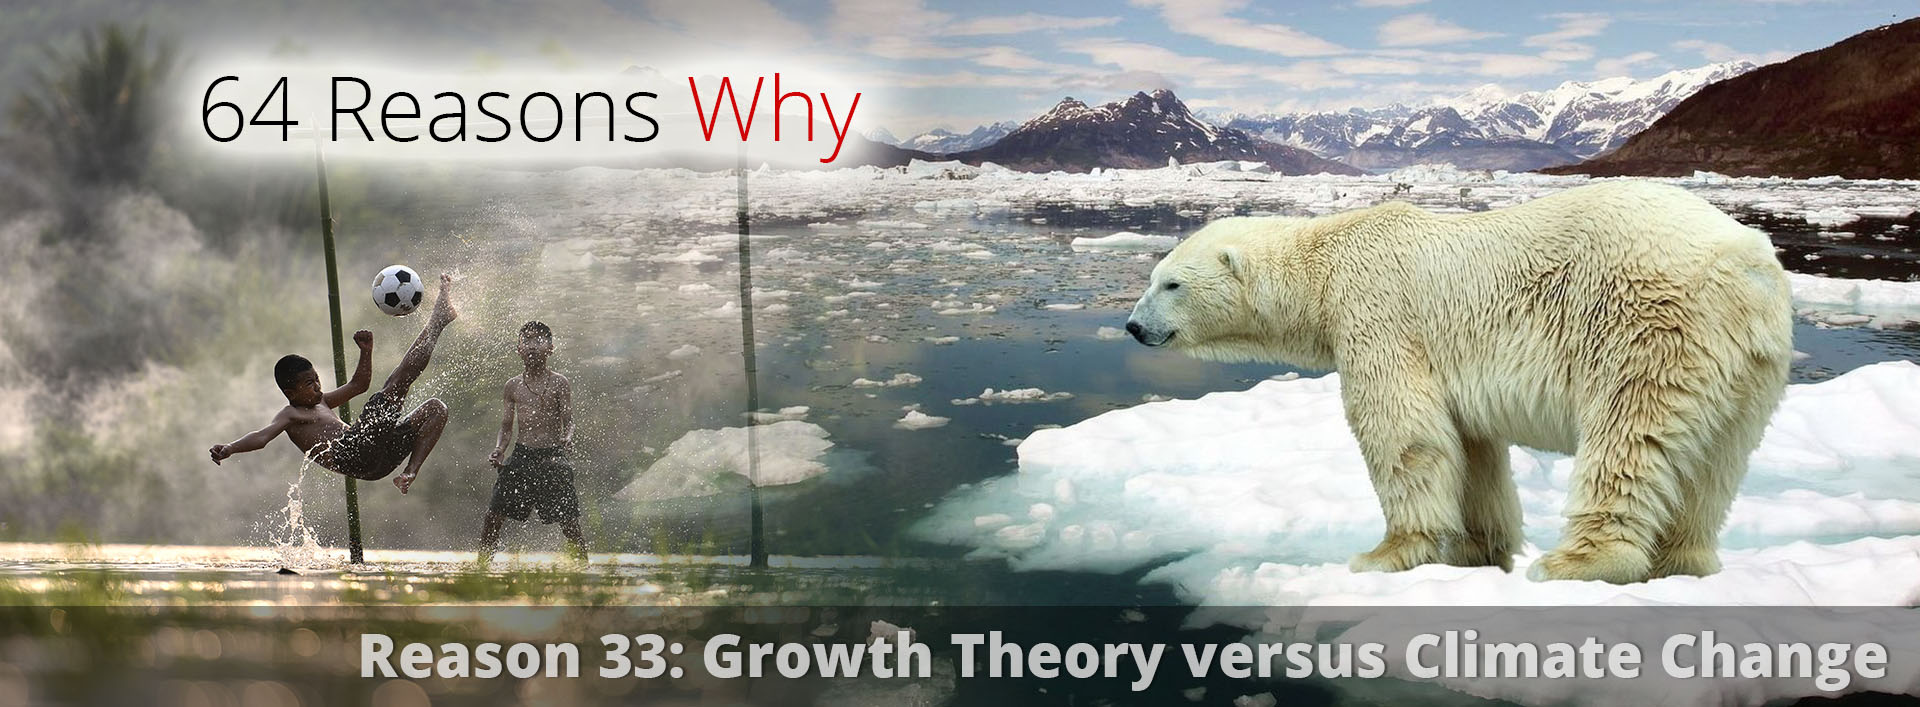 64-Reasons-Why__Reason-33__Growth-Theory-versus-Climate-Change__1.04